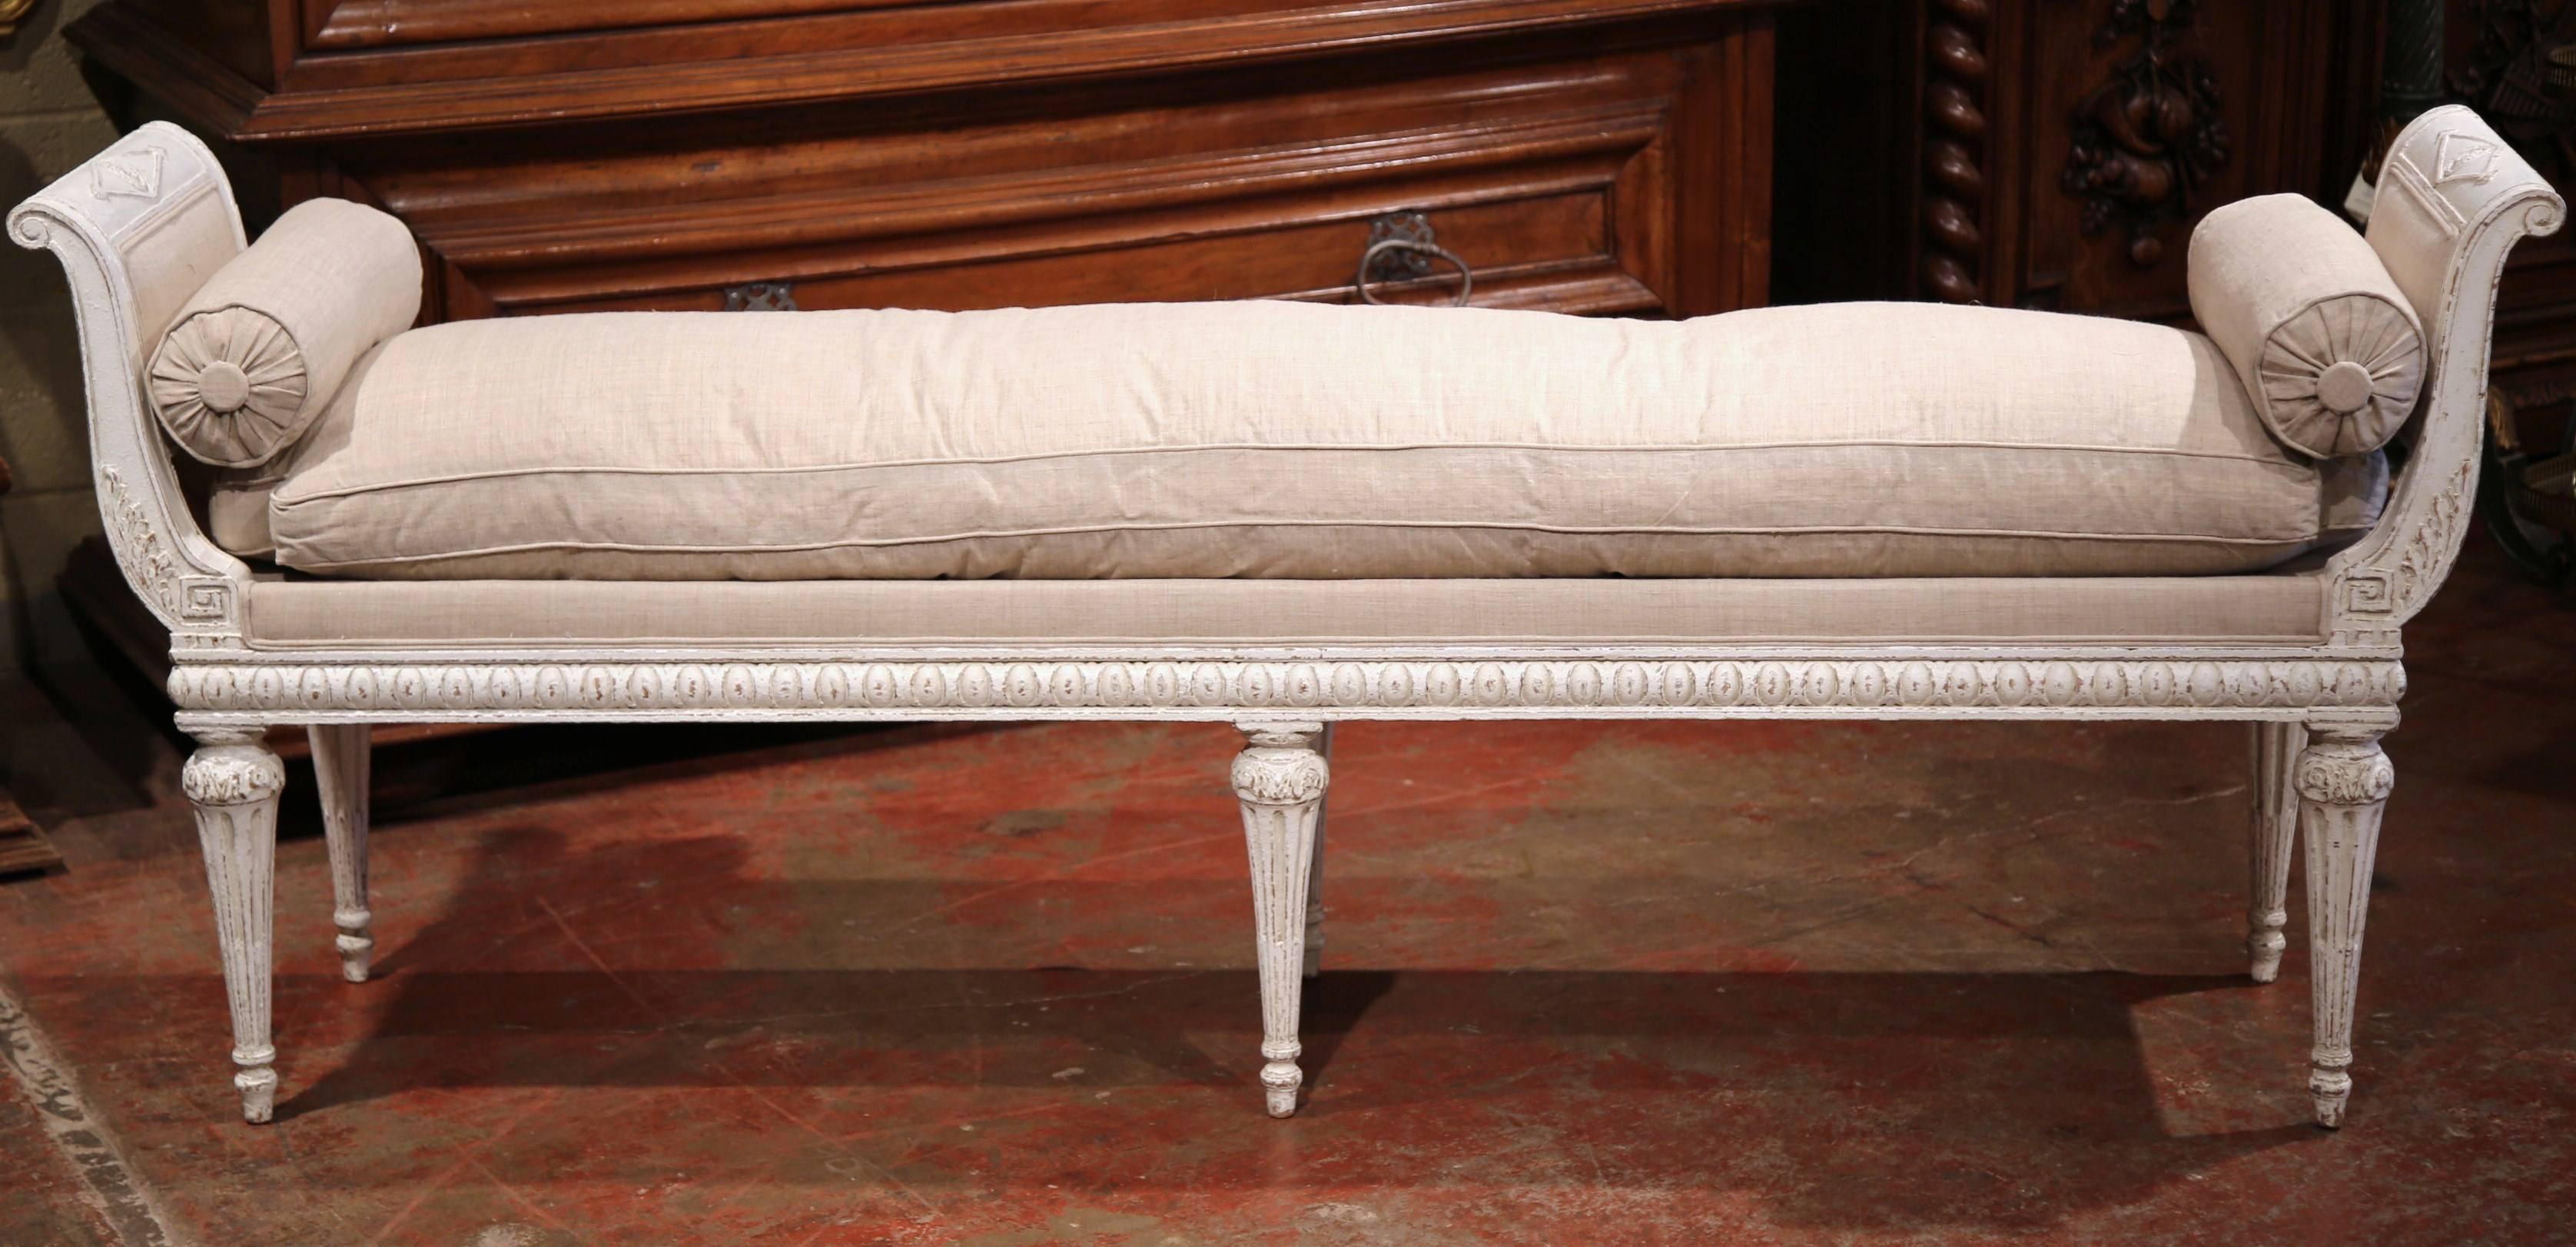 Add extra seating to a living room or the foot of a bed with this elegant, narrow antique banquette from France, circa 1880. The bench has six tapered legs, a carved apron and a curved back at each end in the Empire or Directoire style. The piece